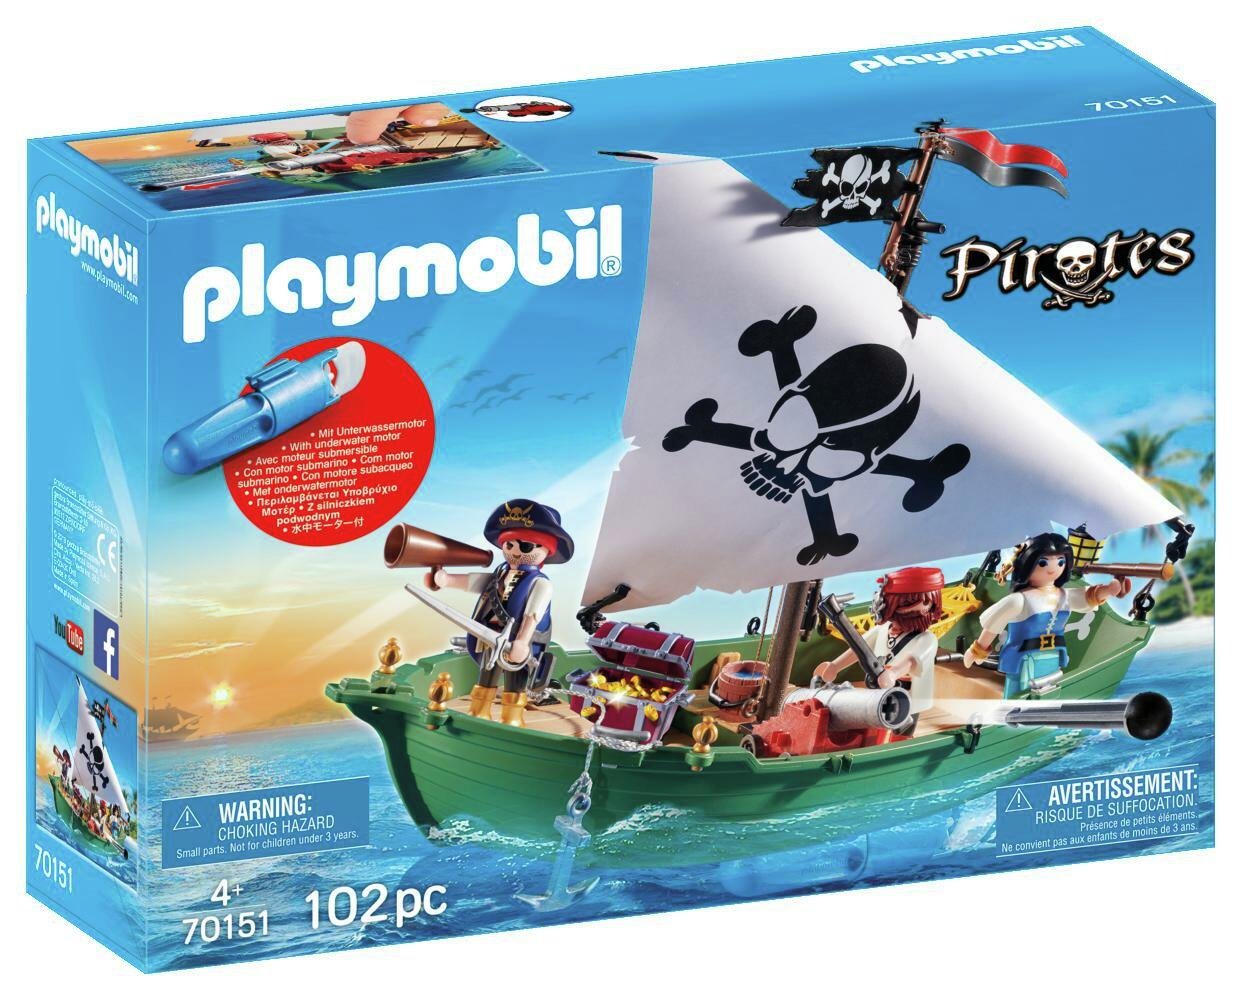 Playmobil 70151 Pirate Ship and Motor Playset Review